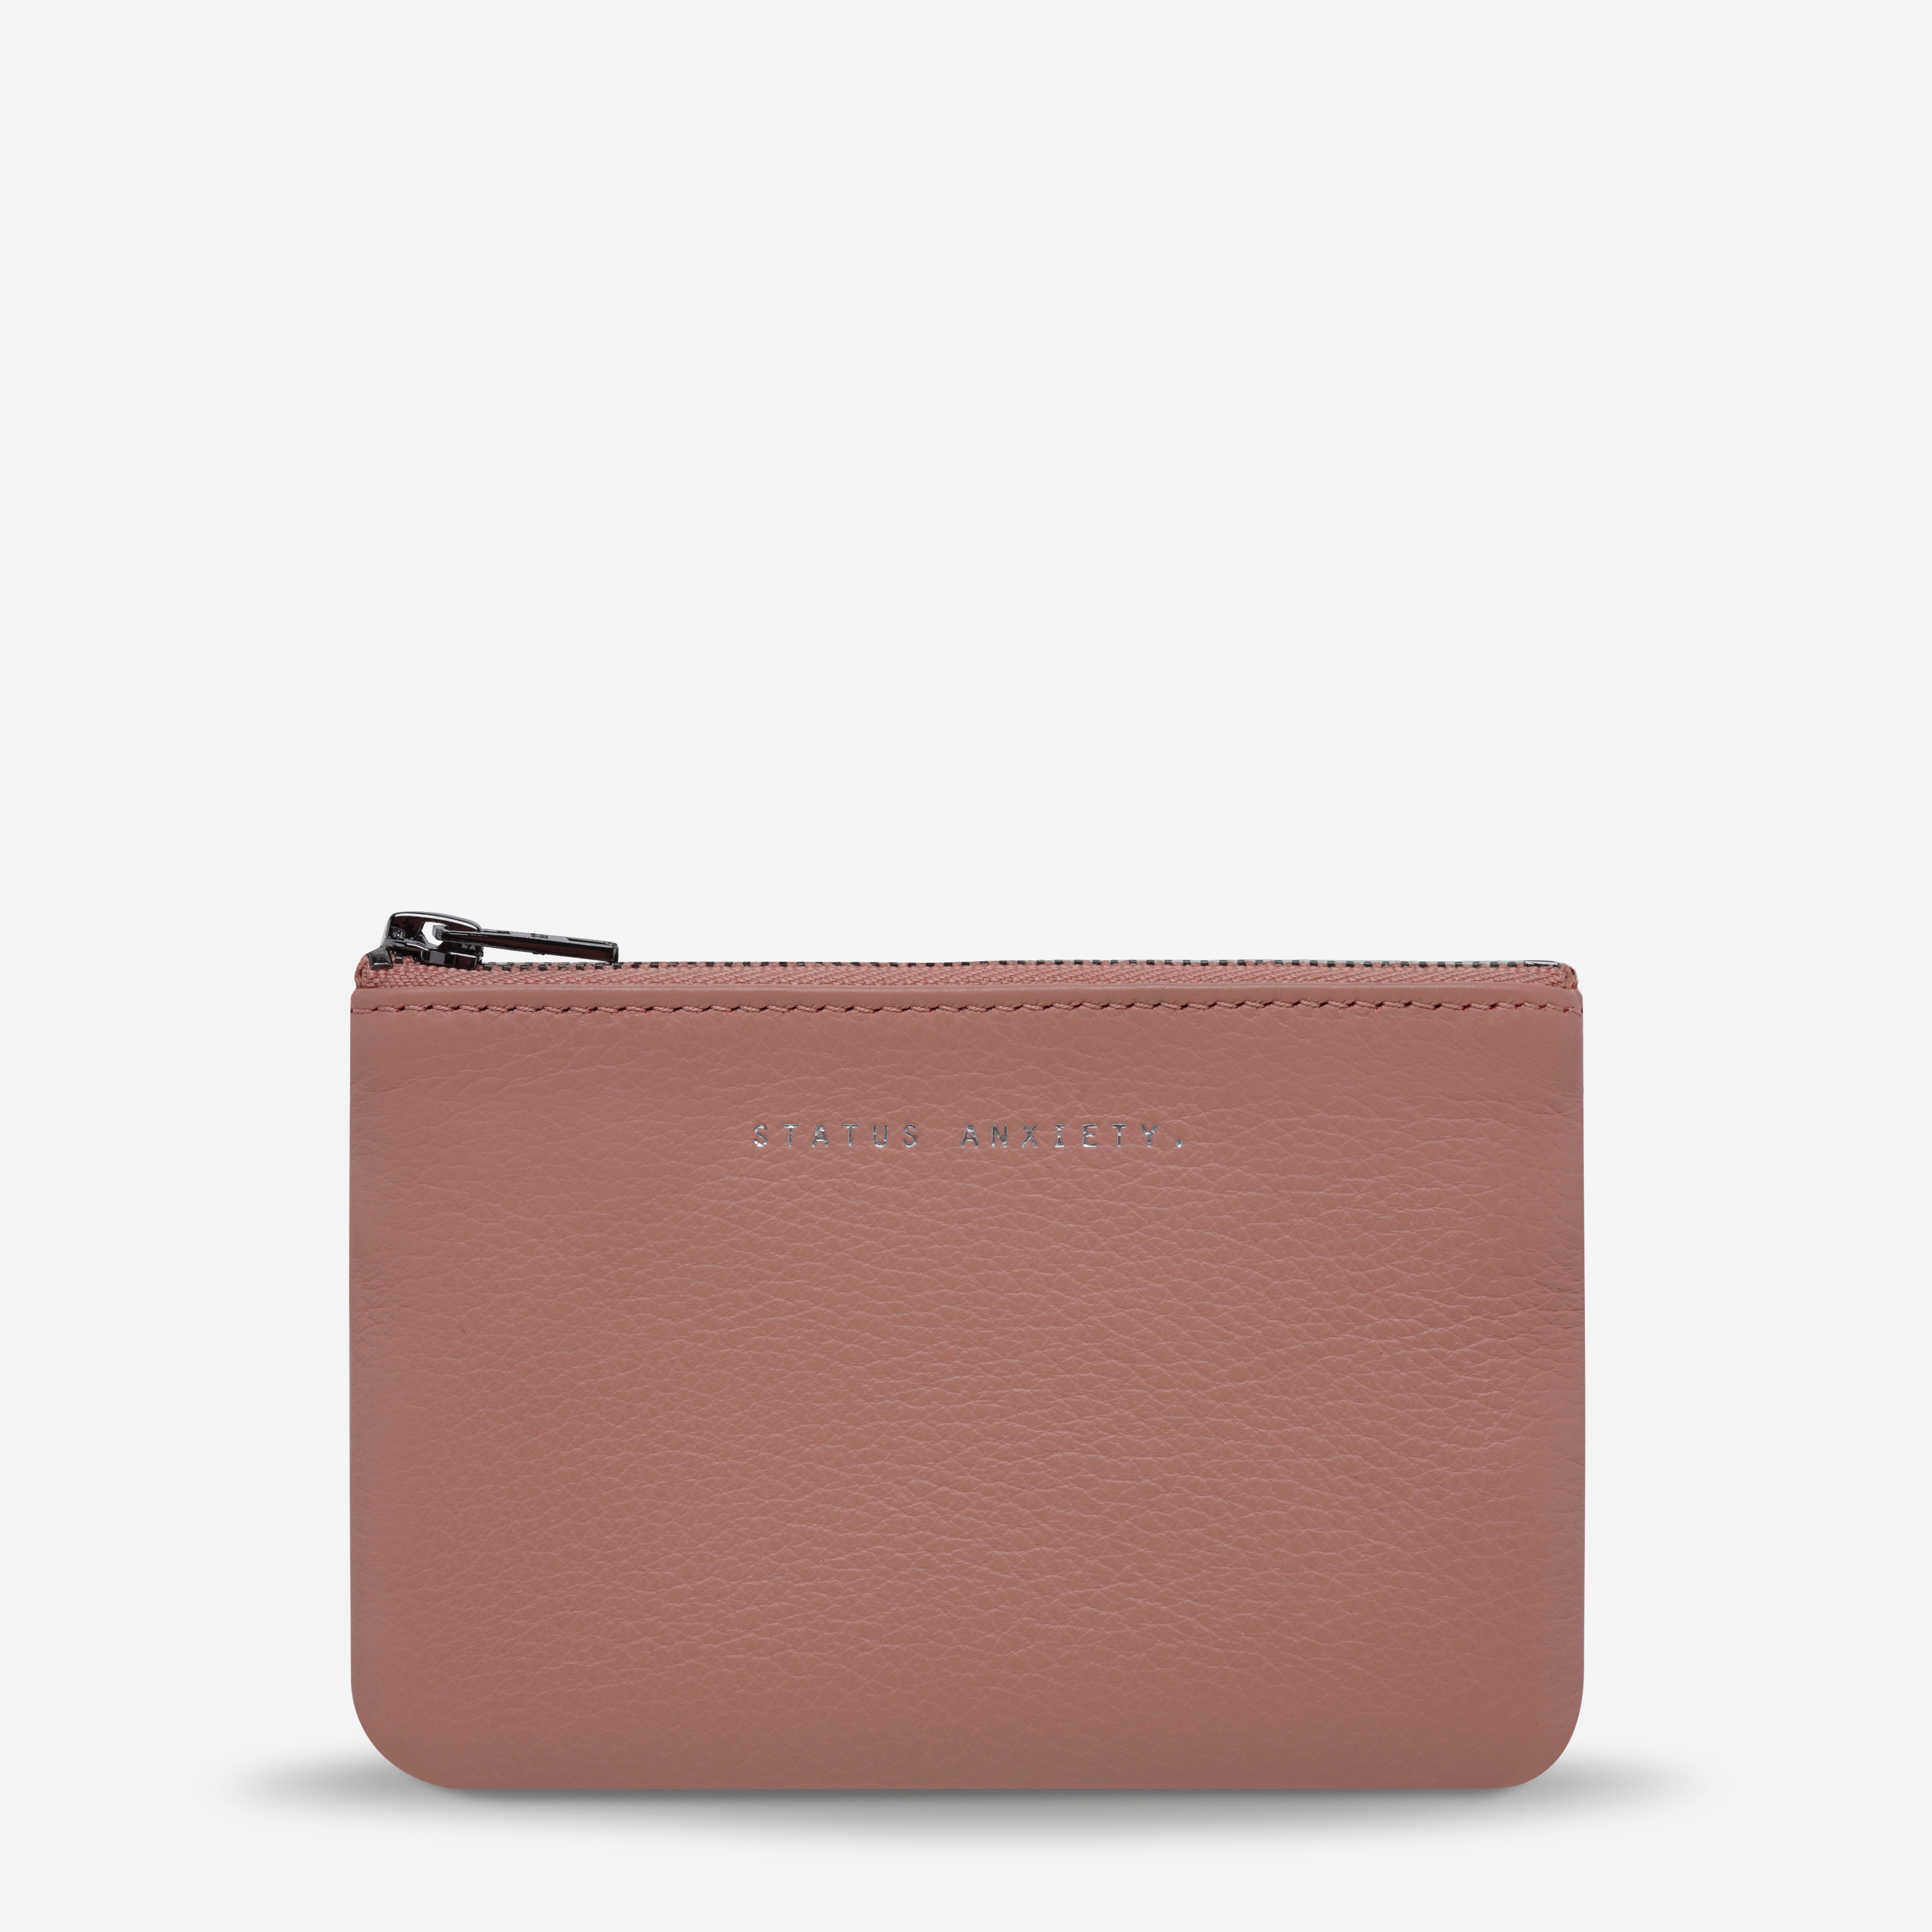 Status Anxiety Change It All Women's Leather Wallet Dusty Rose